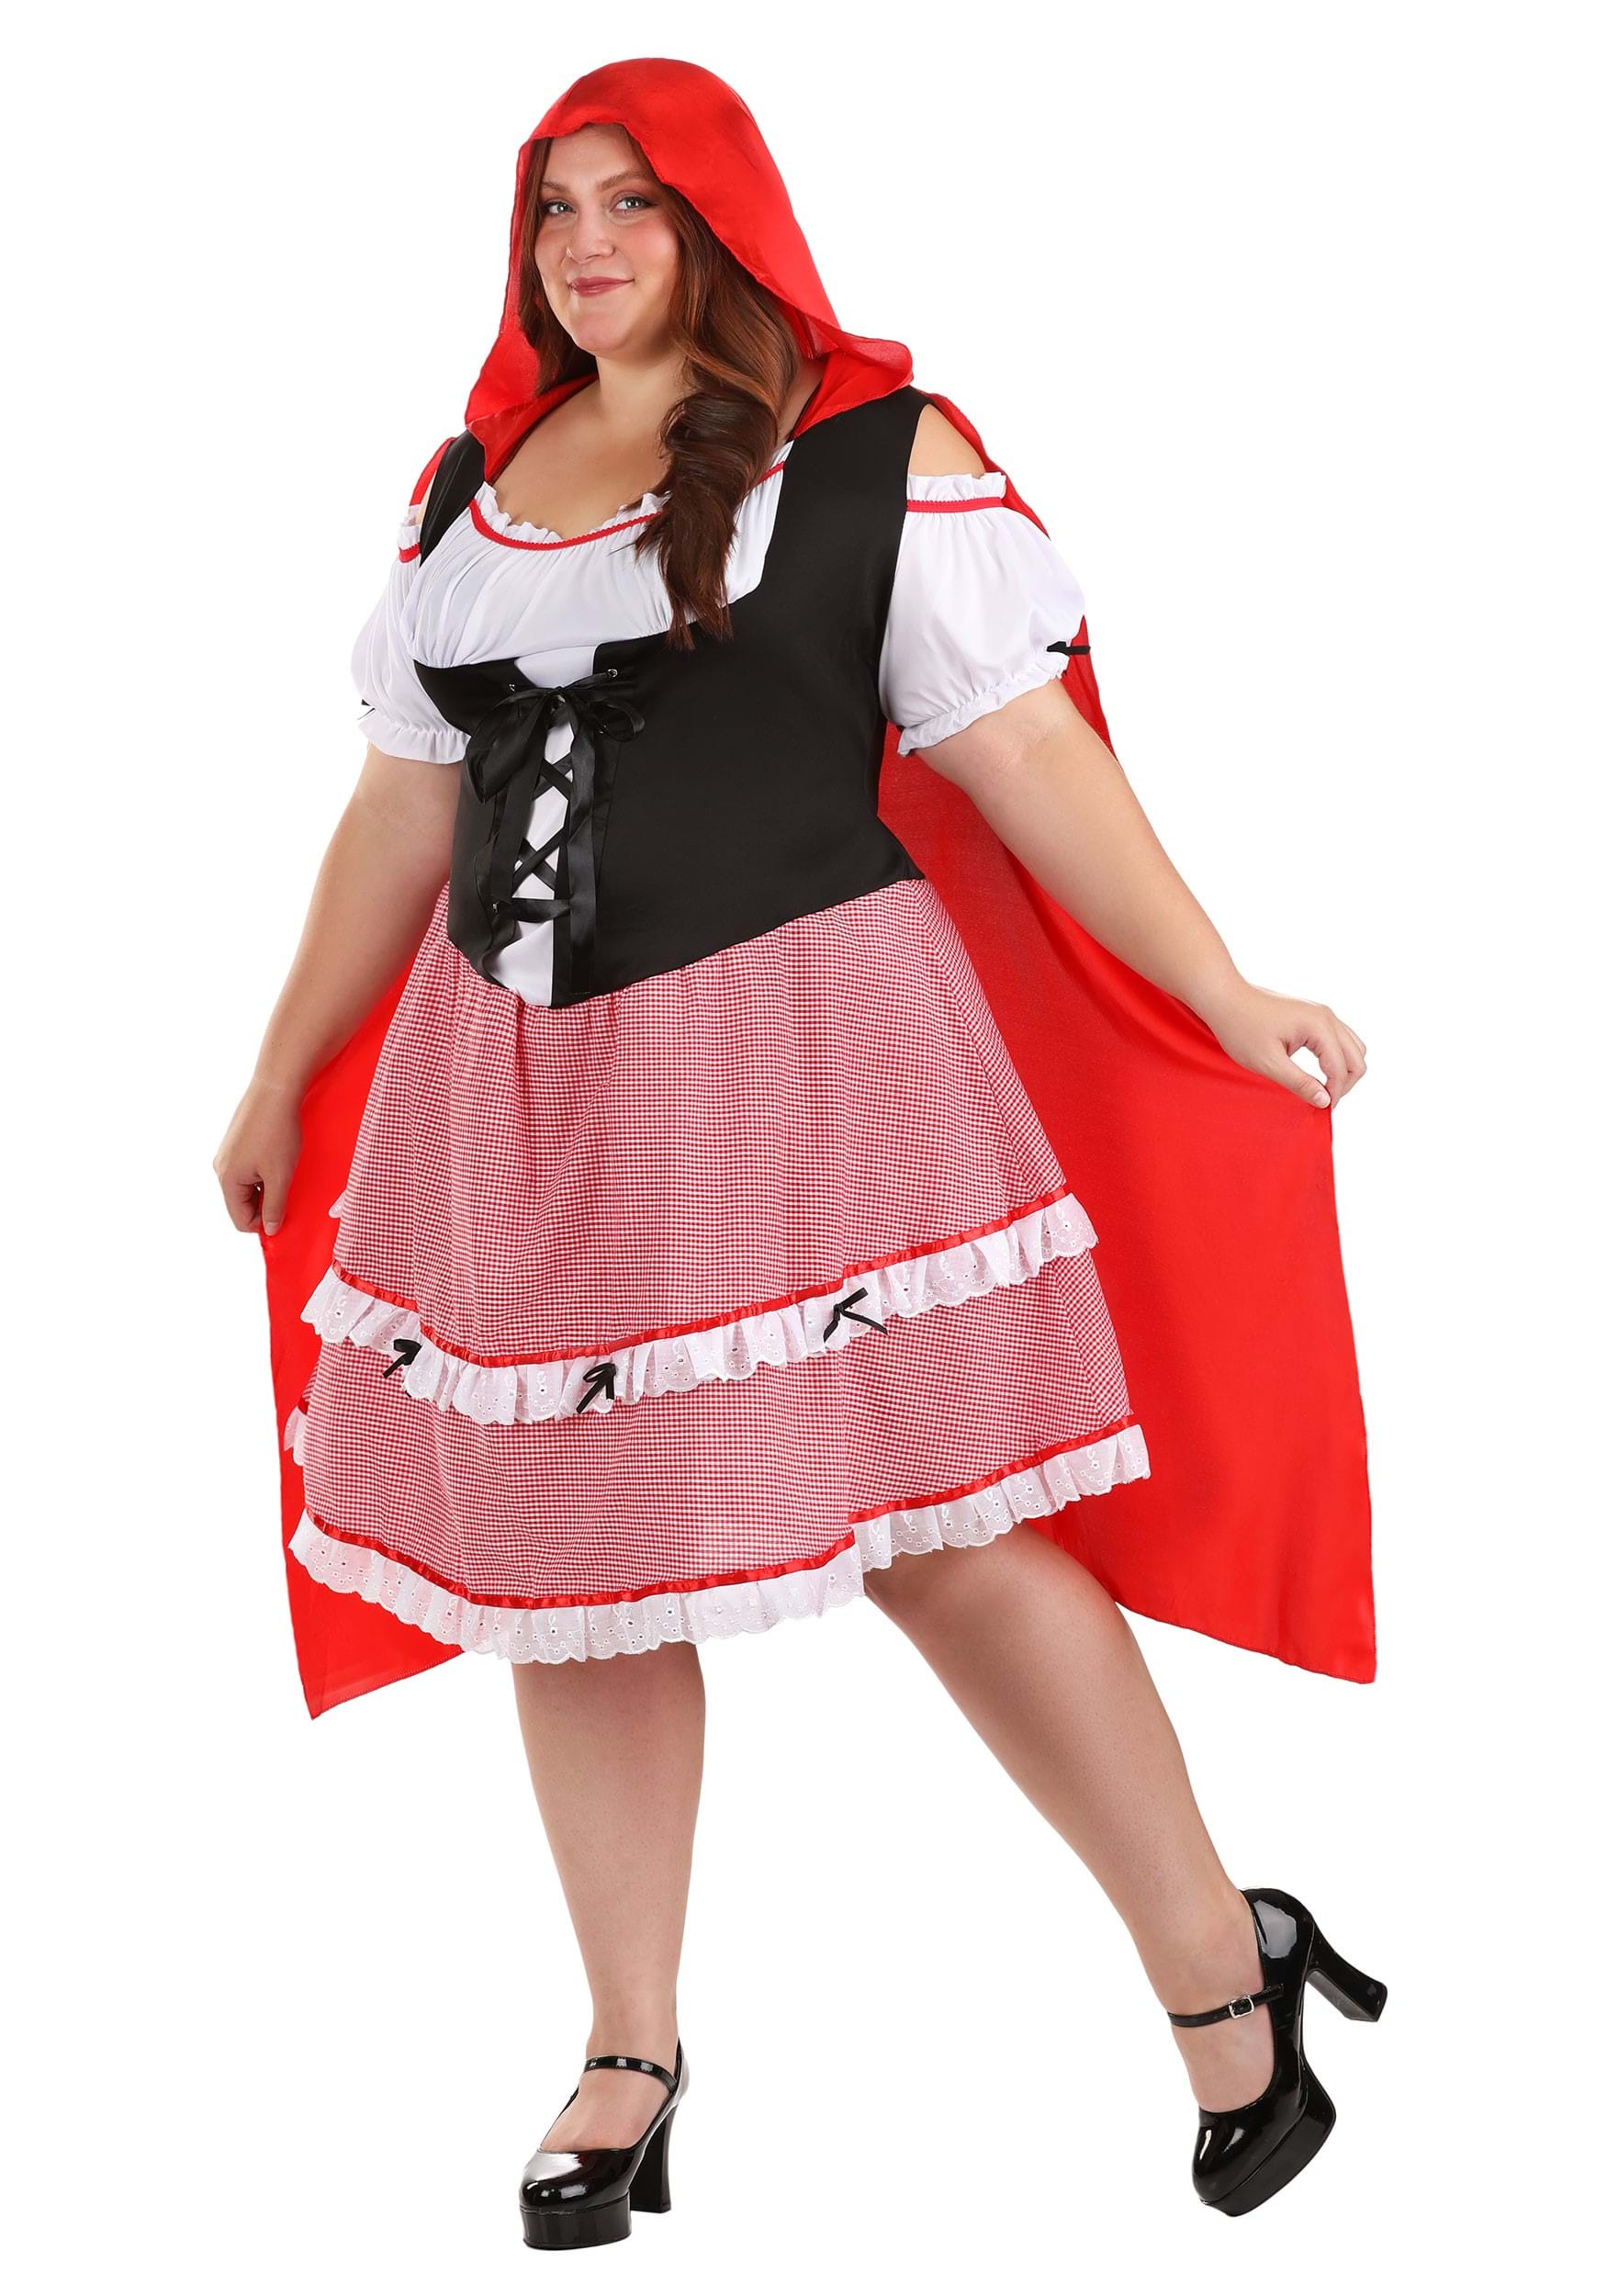 Plus Size Knee Length Red Riding Hood Costume , Storybook Costumes